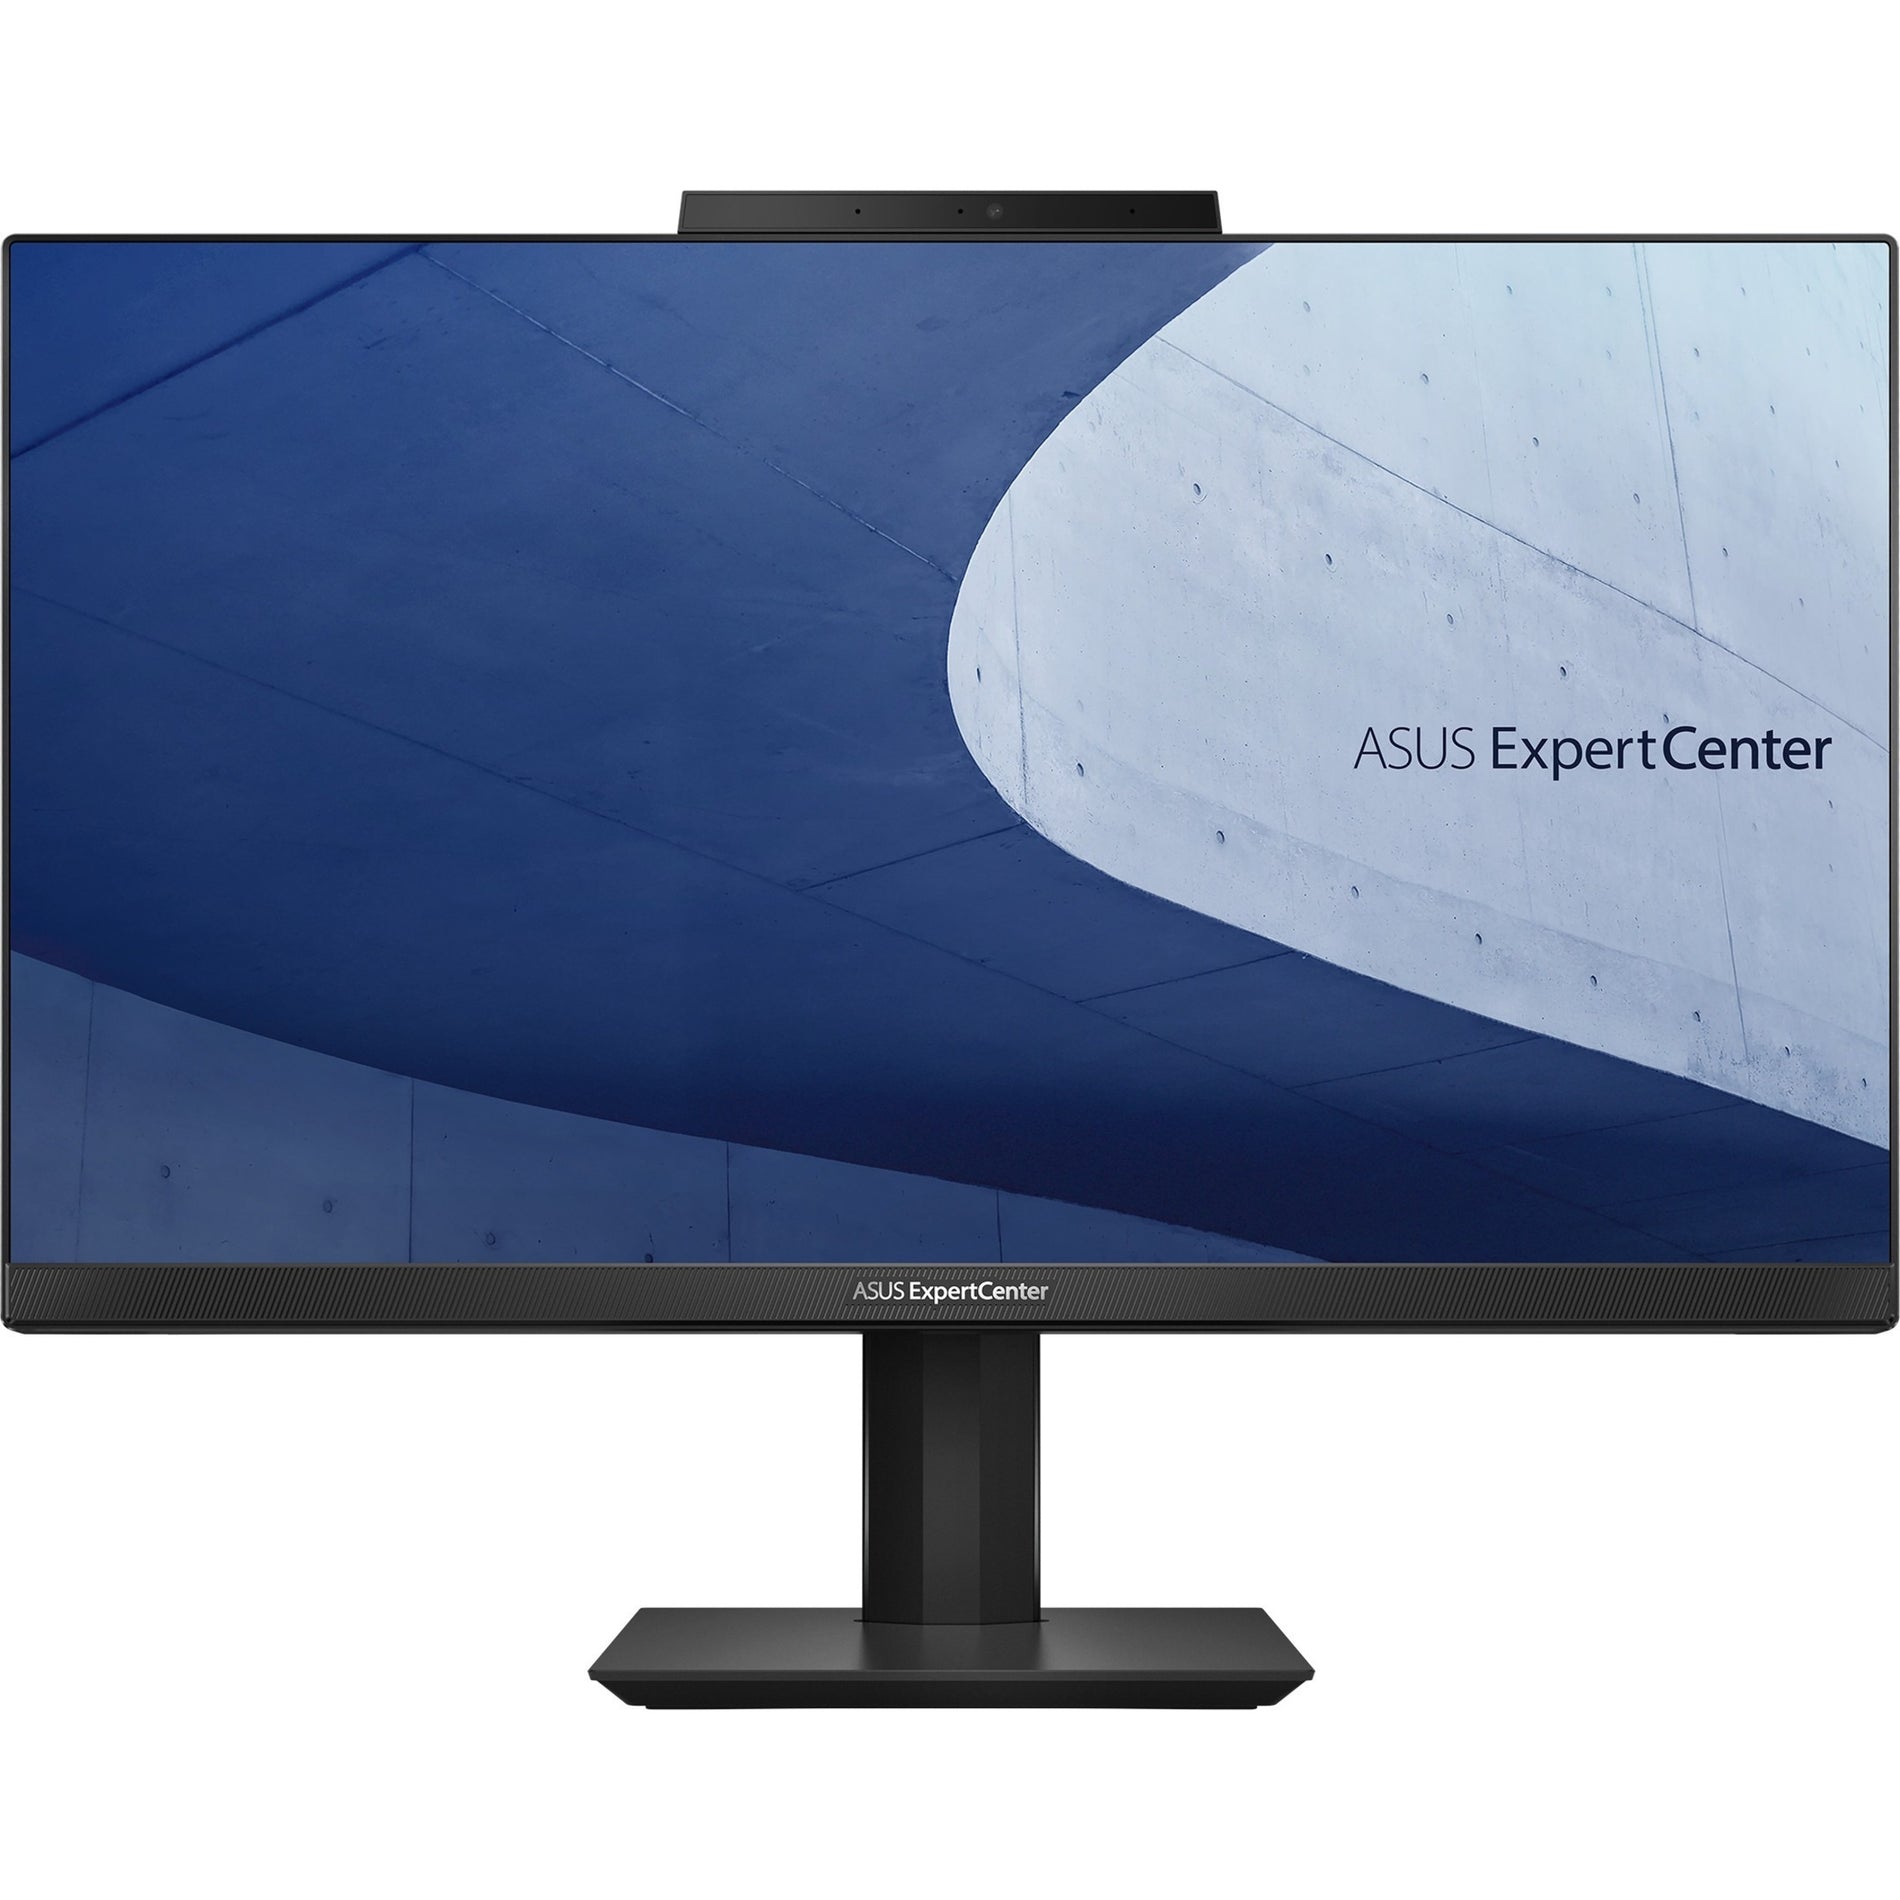 Asus E5402WHA-XH706T ExpertCenter All-in-One Computer, Intel Core i7, 16GB RAM, 1TB SSD, 23.8" Touchscreen Display, Windows 10 Pro